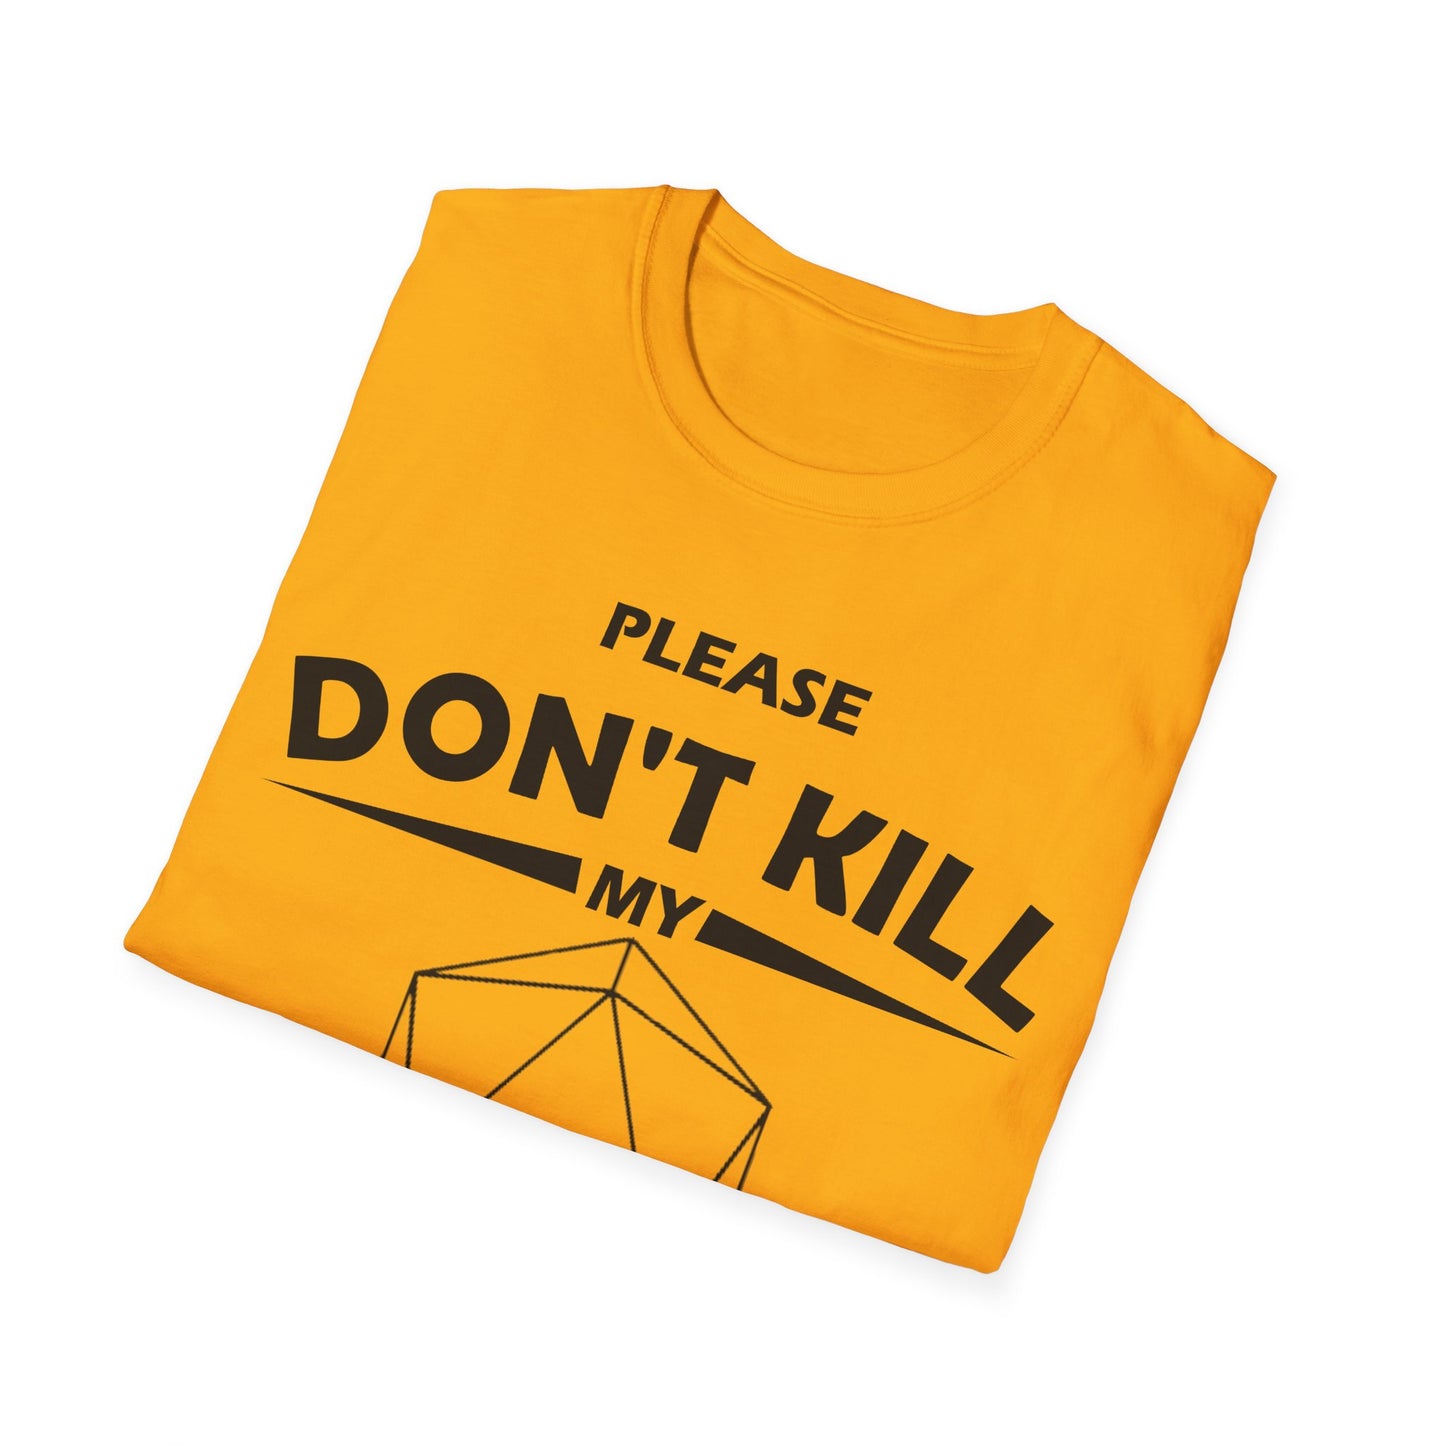 Please Don't Kill My Fighter - Black - Unisex Softstyle T-Shirt